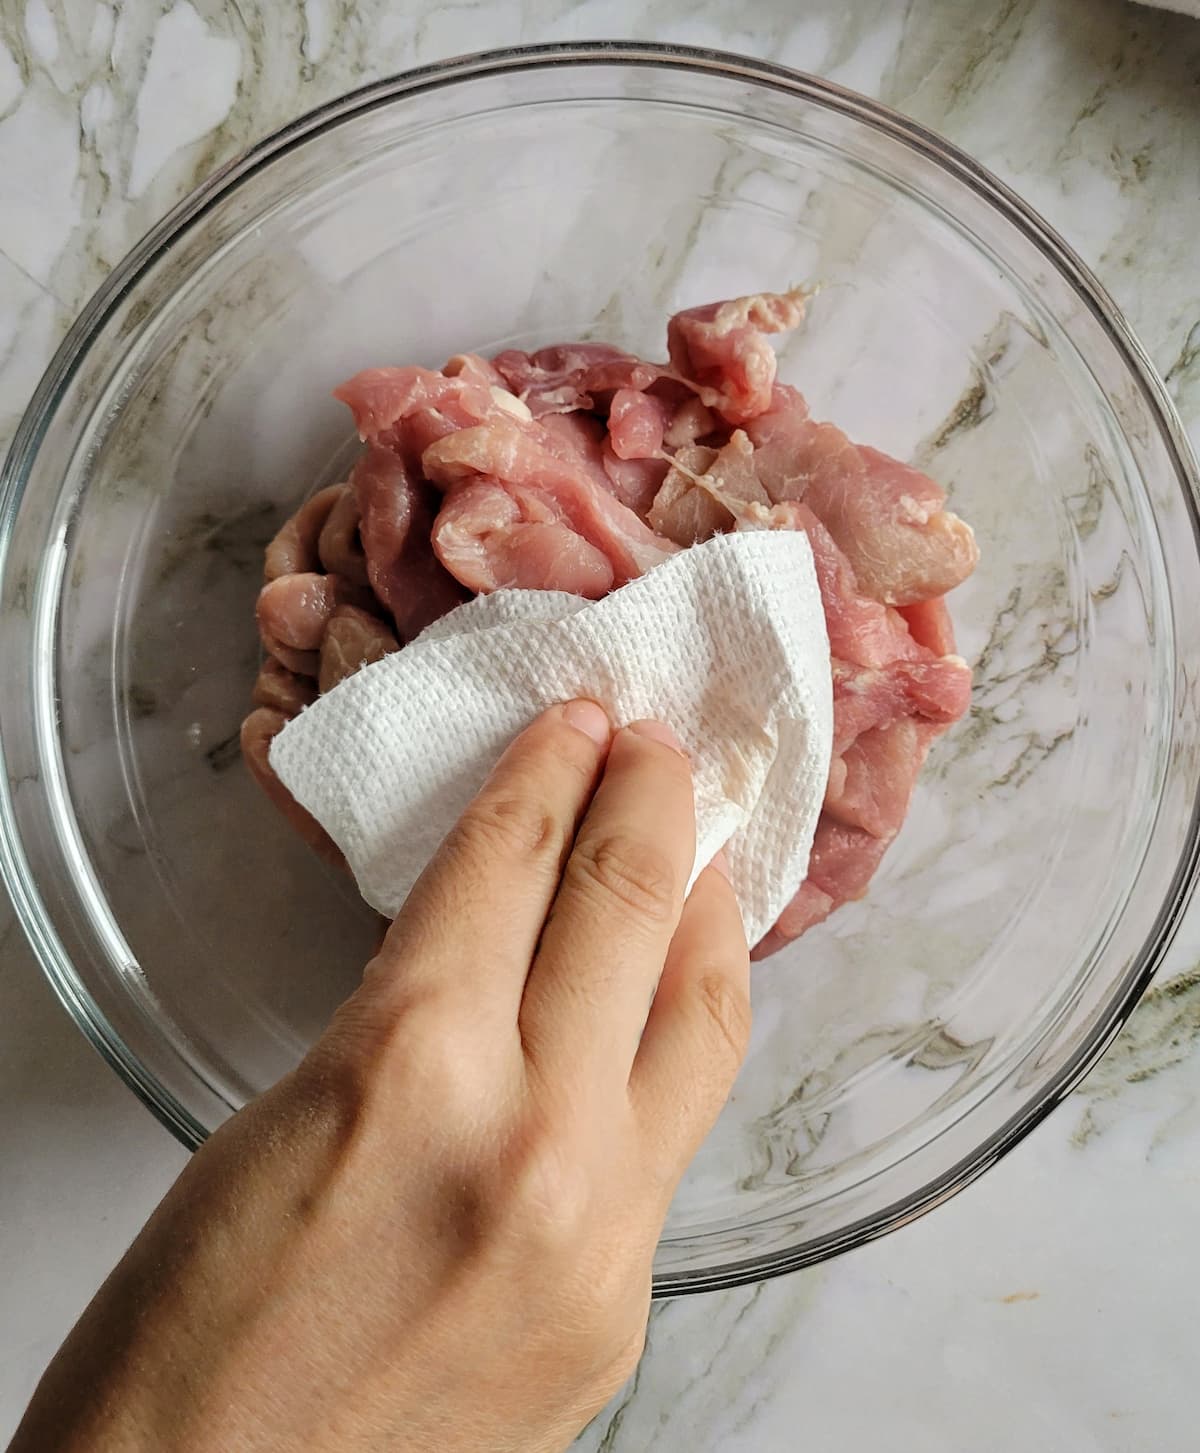 hand with a paper towel patting down raw pork strips in a bowl